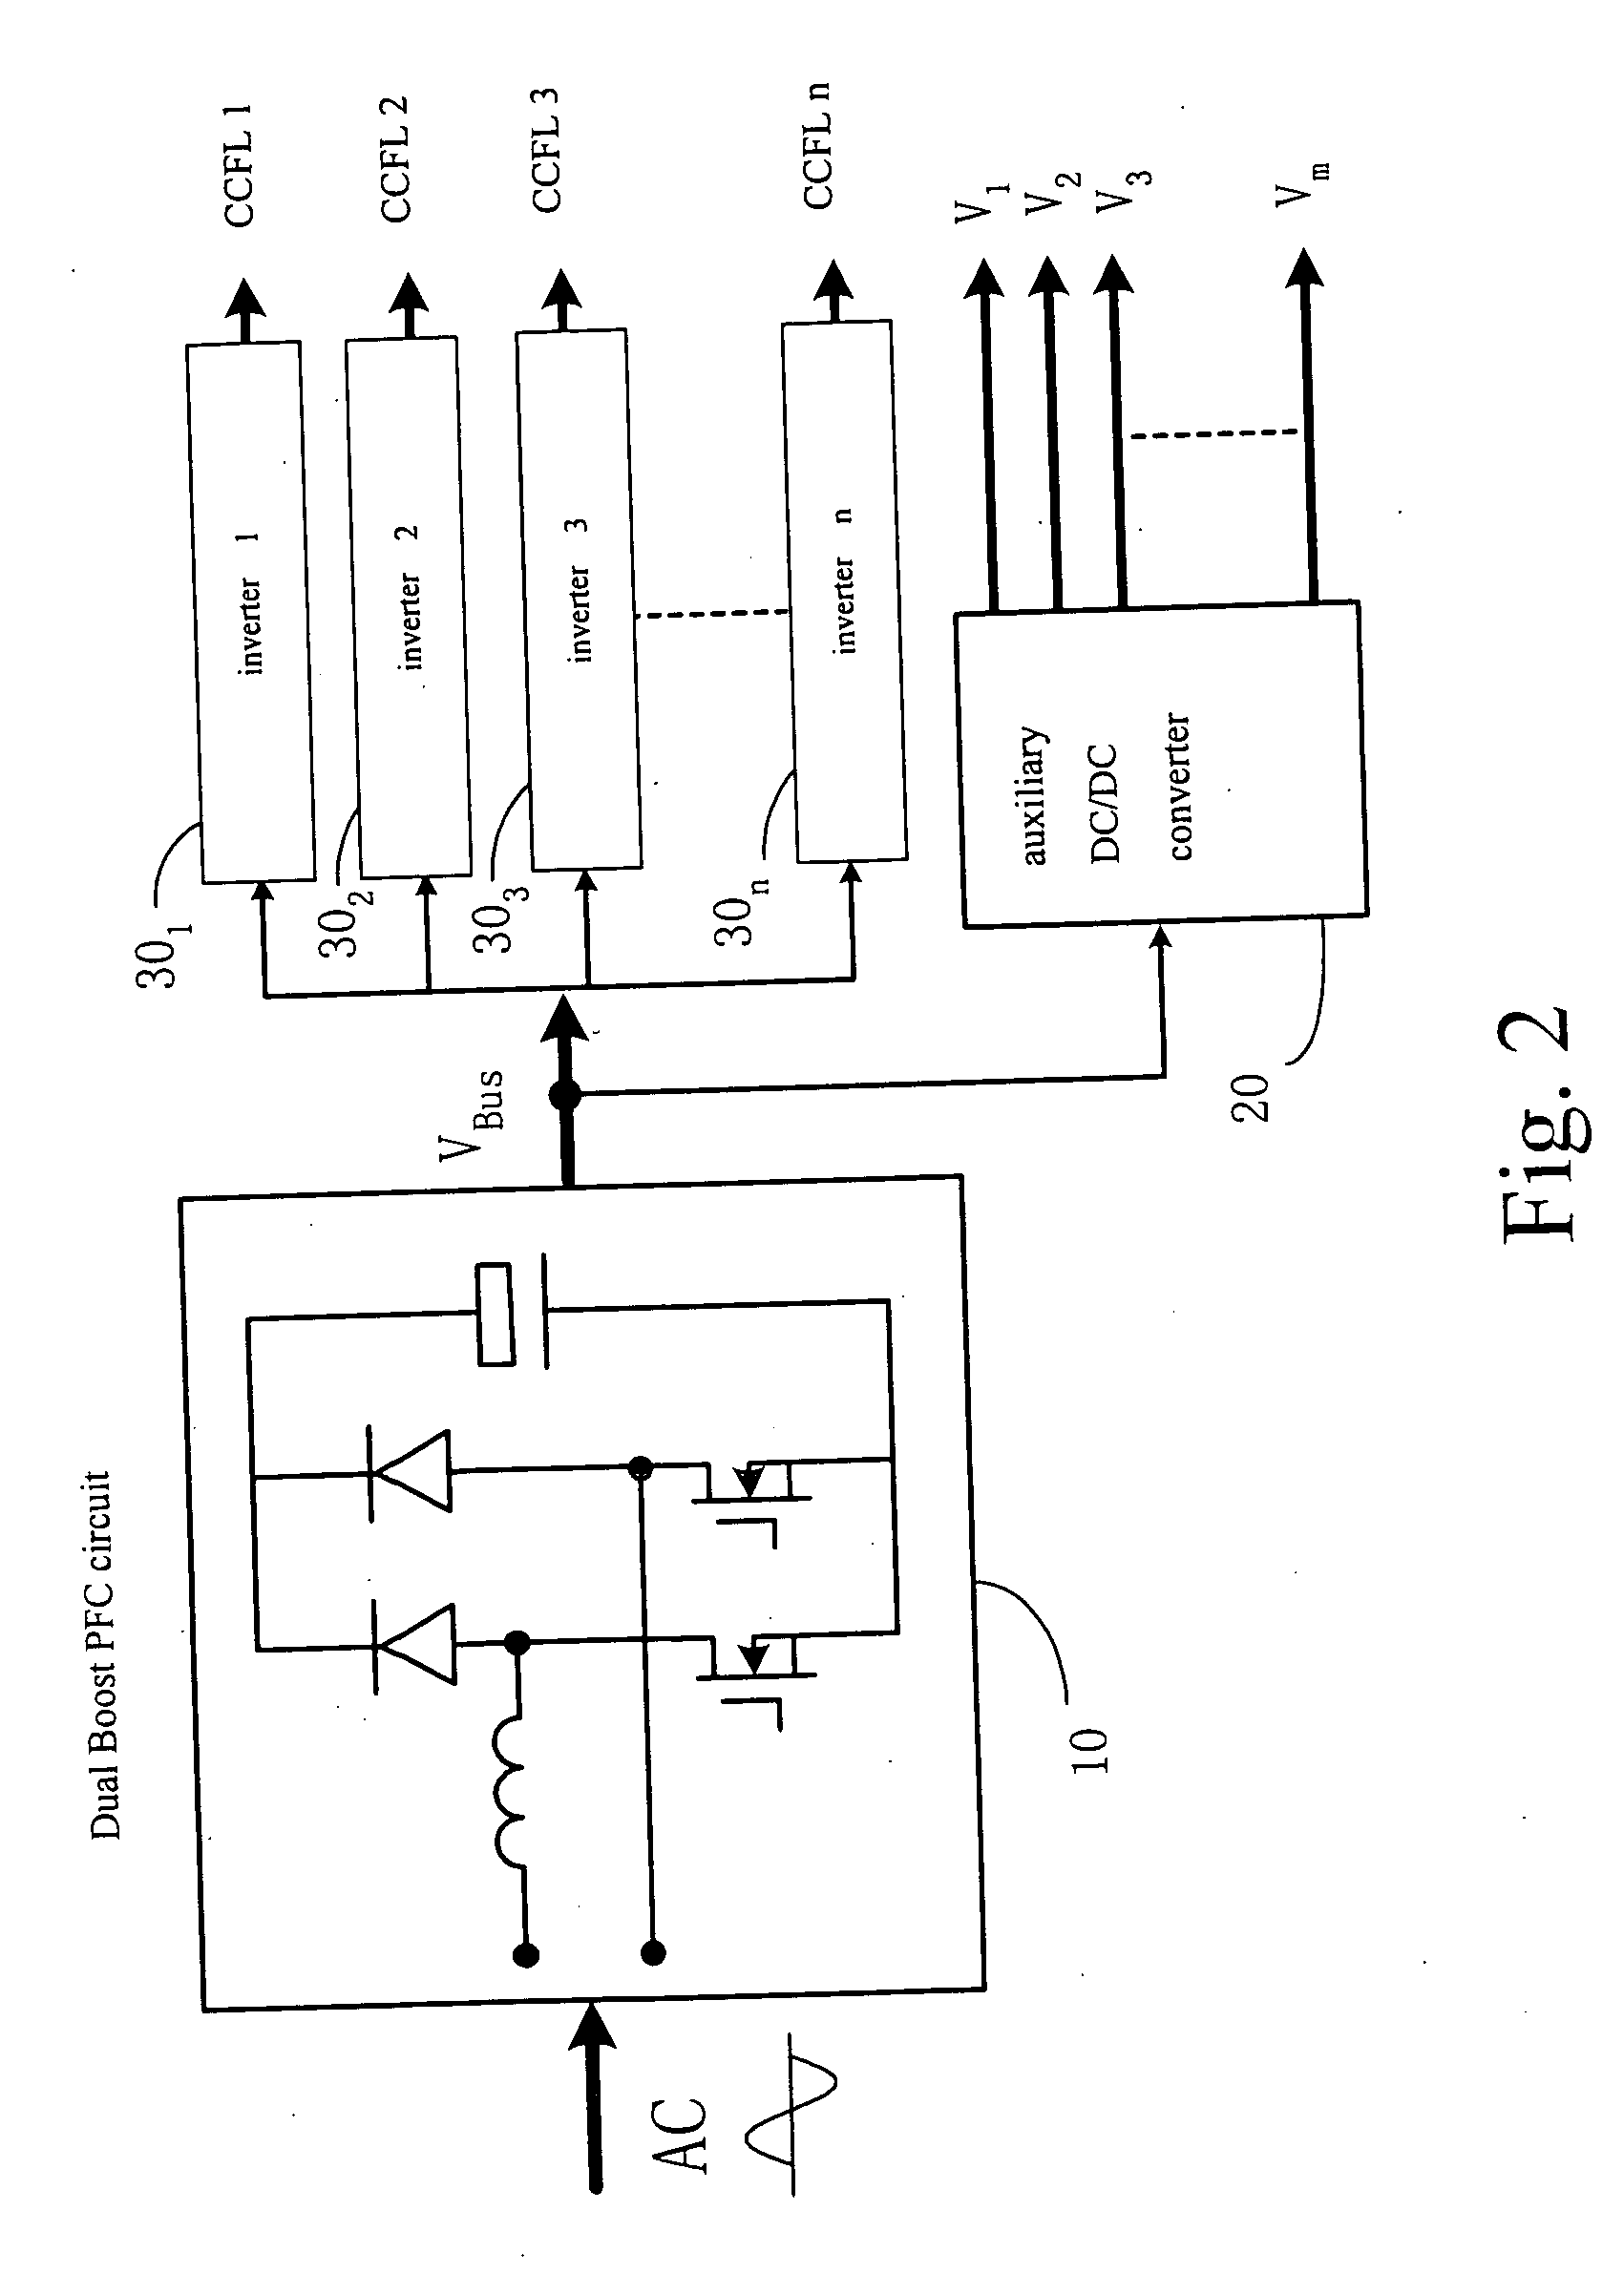 Architecture of power supply system for LCD apparatus